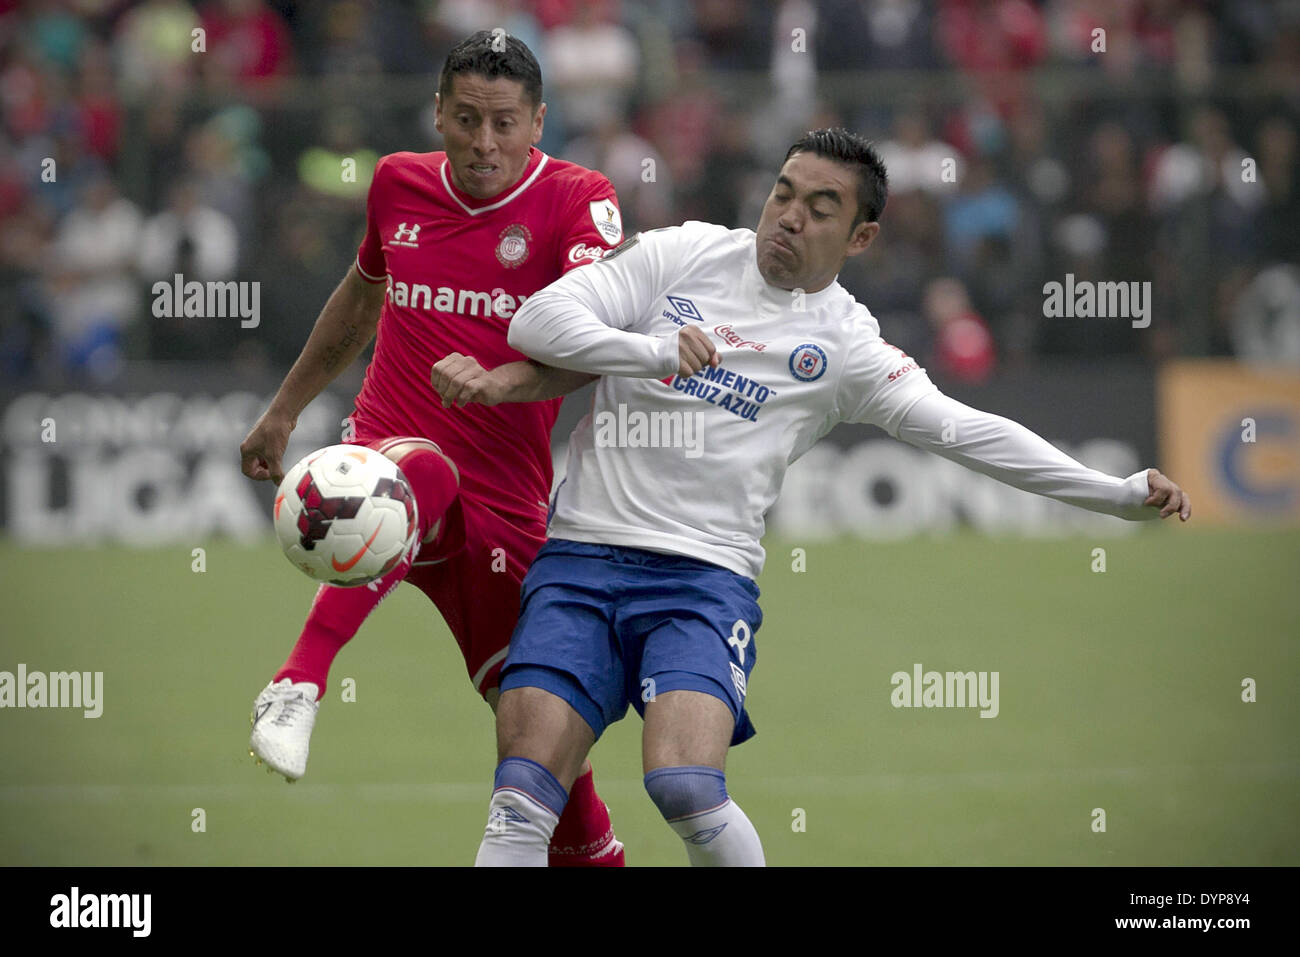 Toluca, Mexico. 23rd Apr, 2014. Toluca's Carlos Esquivel (L) vies for the ball with Marco Fabian of Cruz Azul during the second leg match of the CONCACAF Champions League Final at Nemesio Diez Stadium in Toluca, State of Mexico, Mexico, on April 23, 2014. © Alejandro Ayala/Xinhua/Alamy Live News Stock Photo